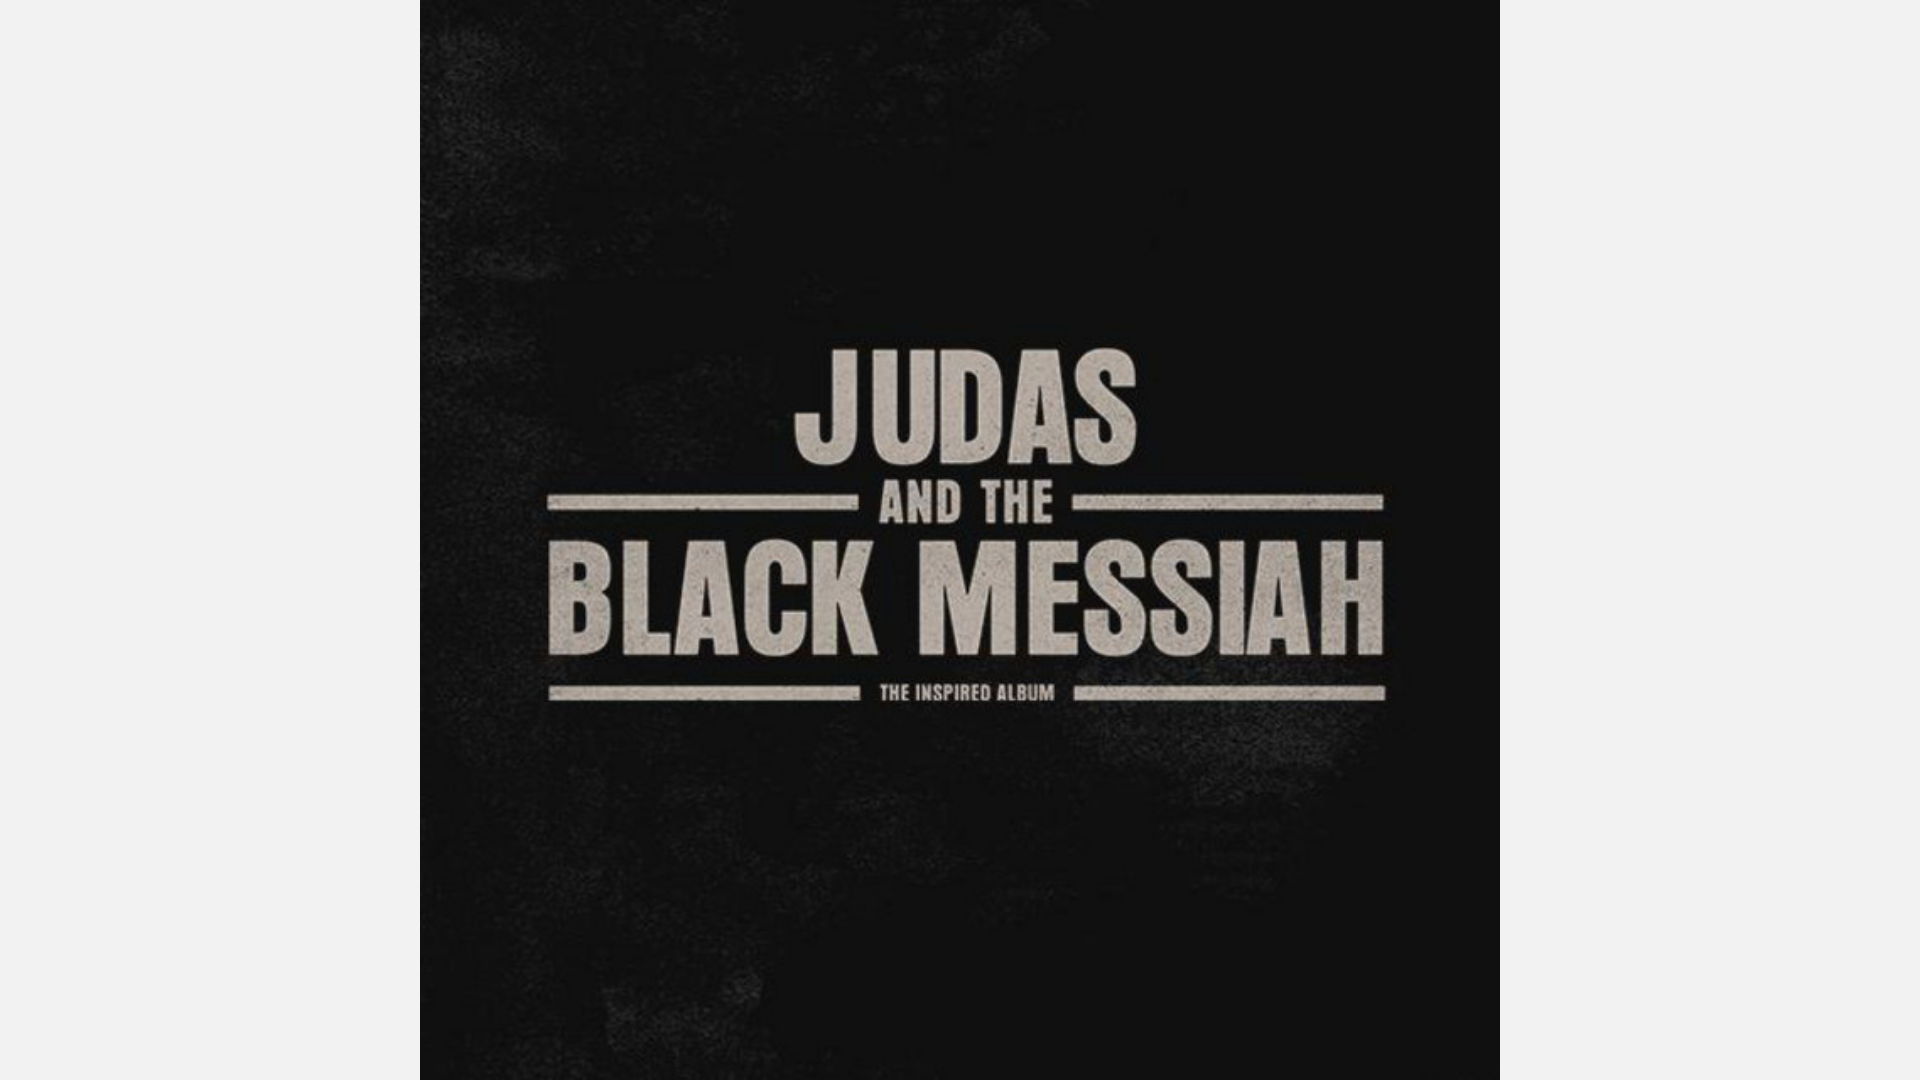 Image of the "Judas" album cover, a black background with the text "Judas and The Black Messiah: The Inspired Album" over it.